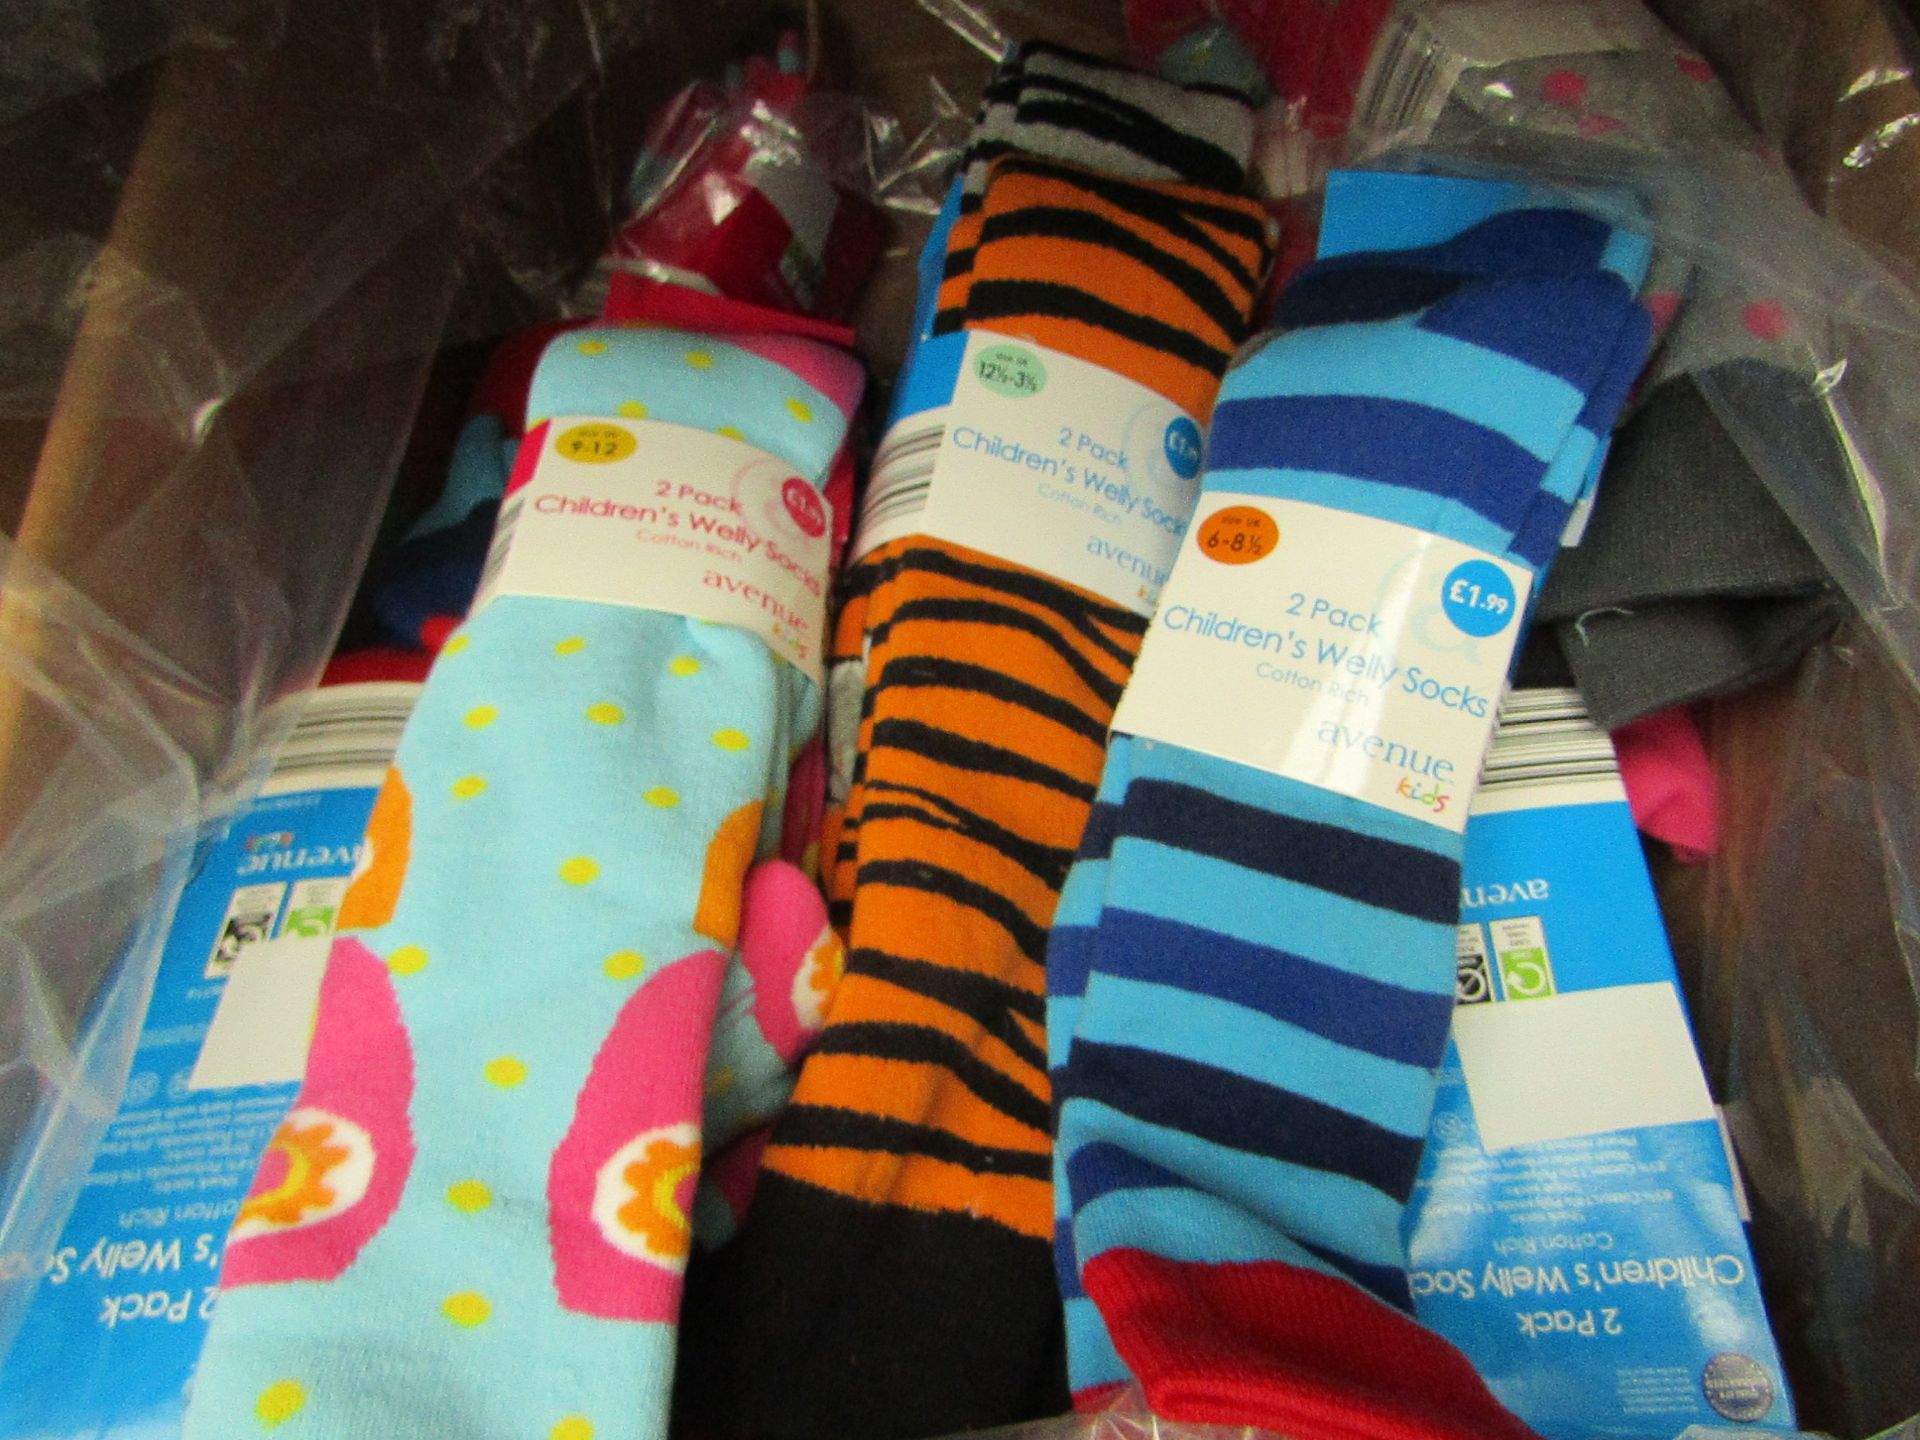 4 x Packs of 2 Avenue Kids various welly socks, size 9-12 all new and packaged.